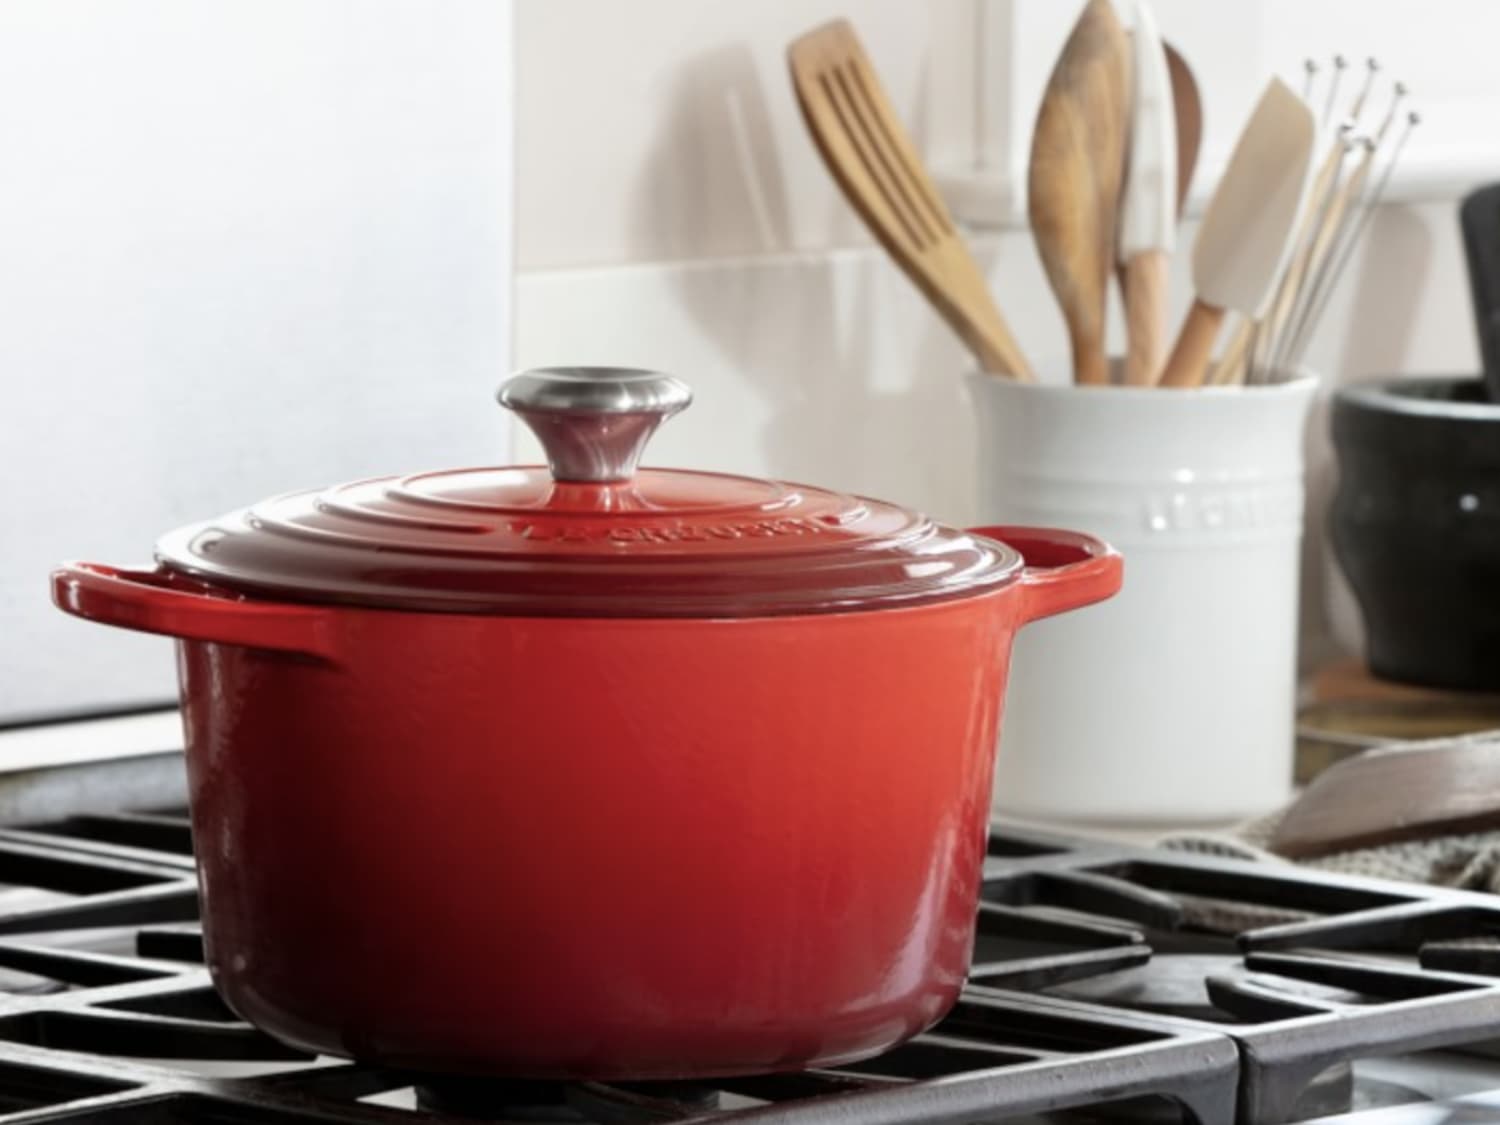 https://cdn.apartmenttherapy.info/image/upload/f_jpg,q_auto:eco,c_fill,g_auto,w_1500,ar_4:3/commerce%2FLe-Creuset-Red-Deep-Oven